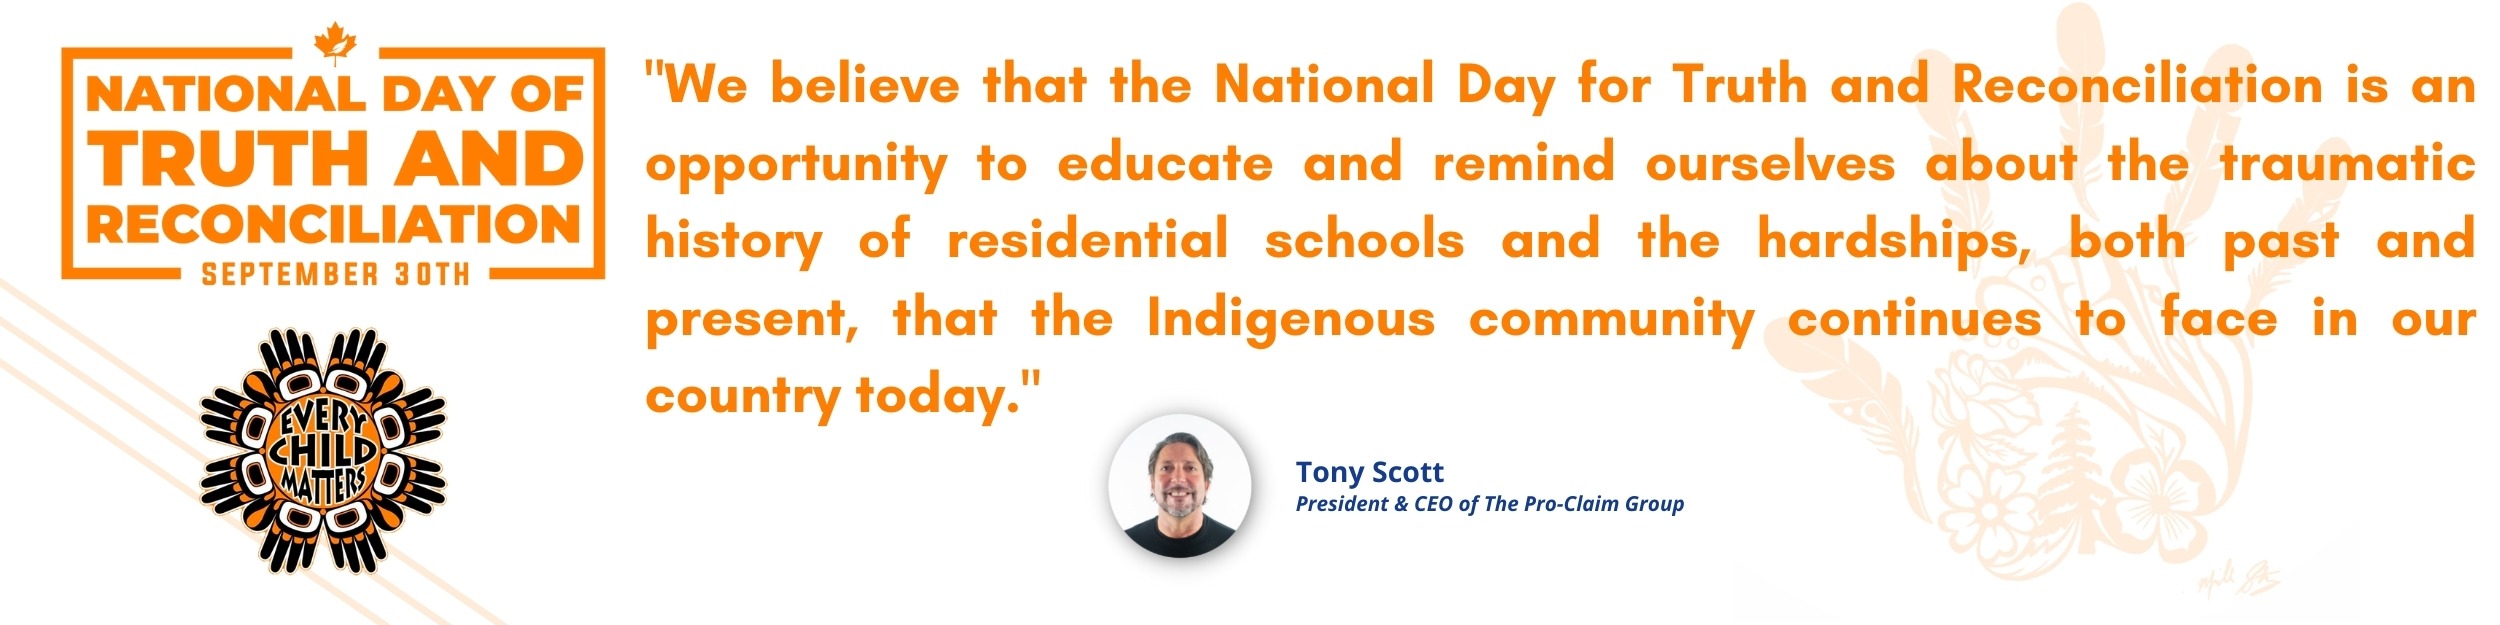 We believe that the National Day for Truth and Reconciliation is an opportunity to educate and remind ourselves about the traumatic history of residential schools and the hardhips, both past and present, that the indigenous community continues to face in our country today